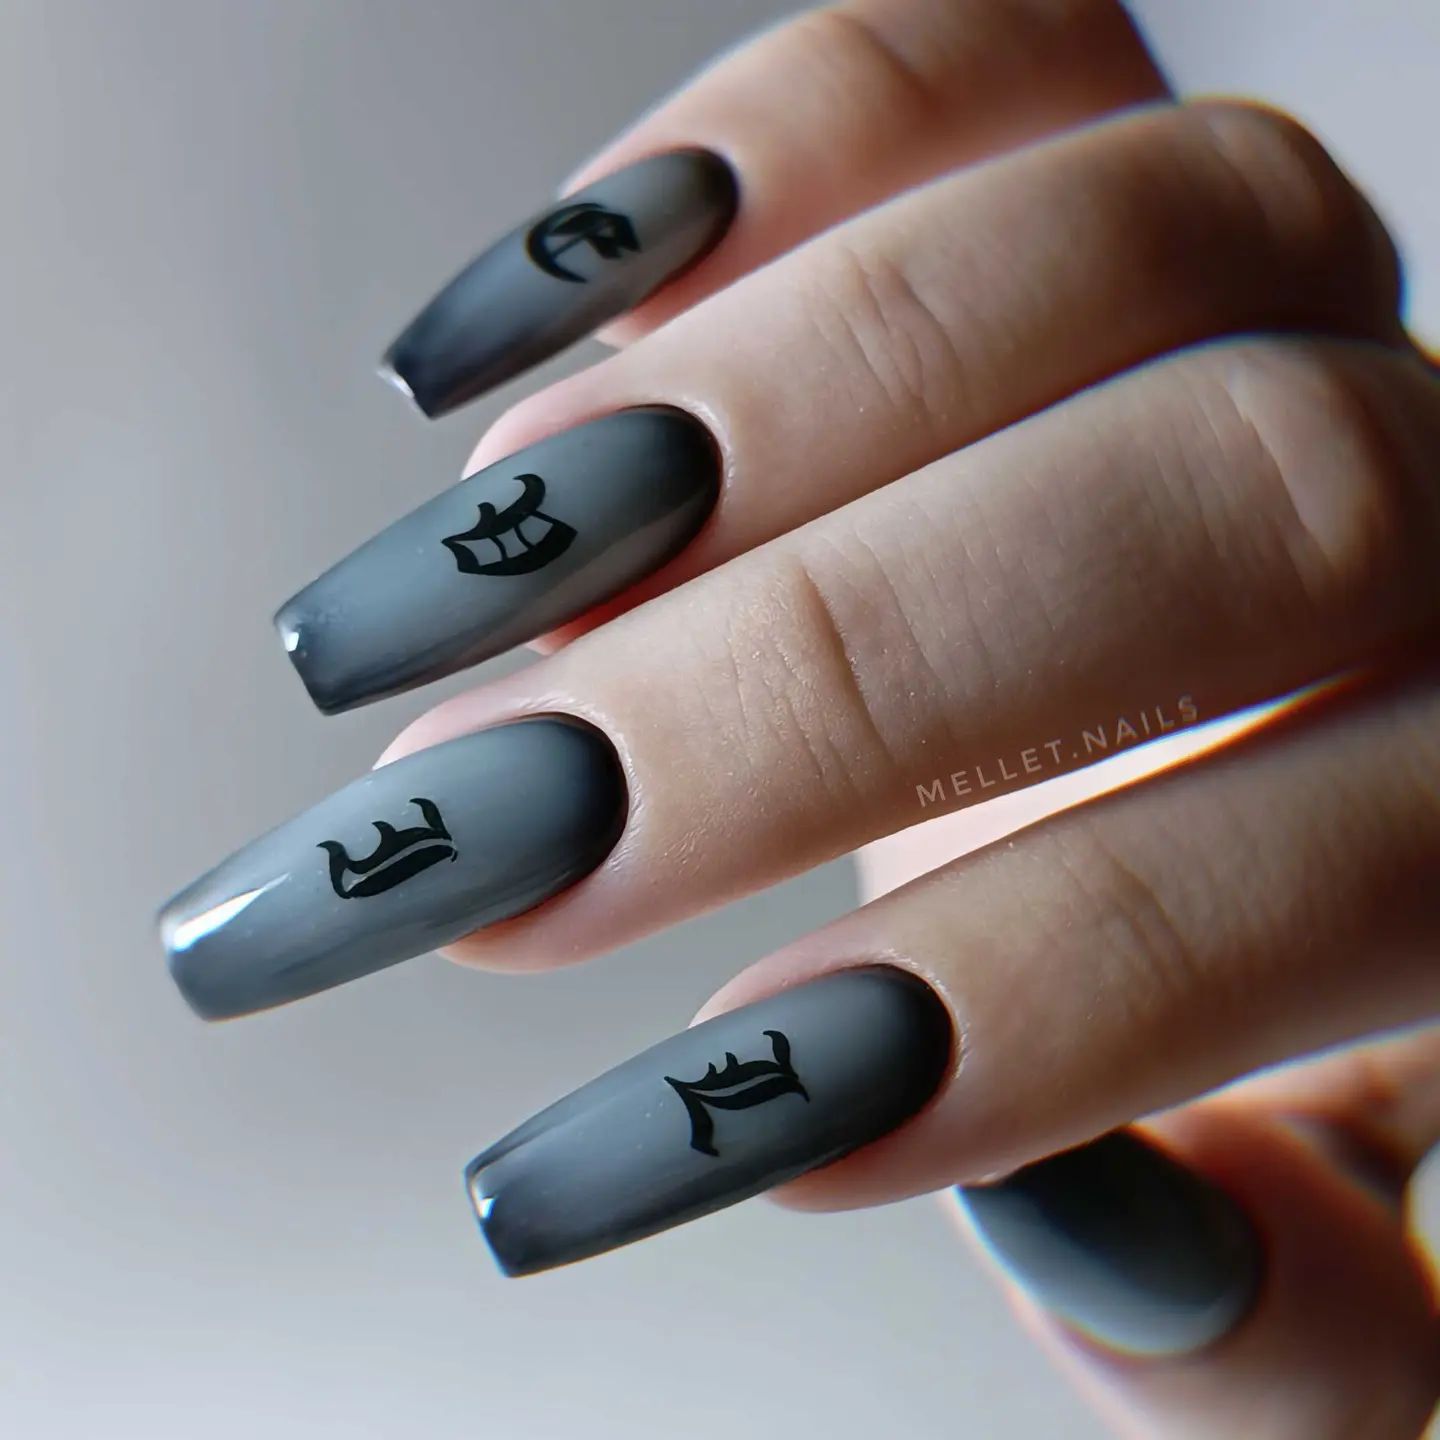 Goth coffin nails with letters